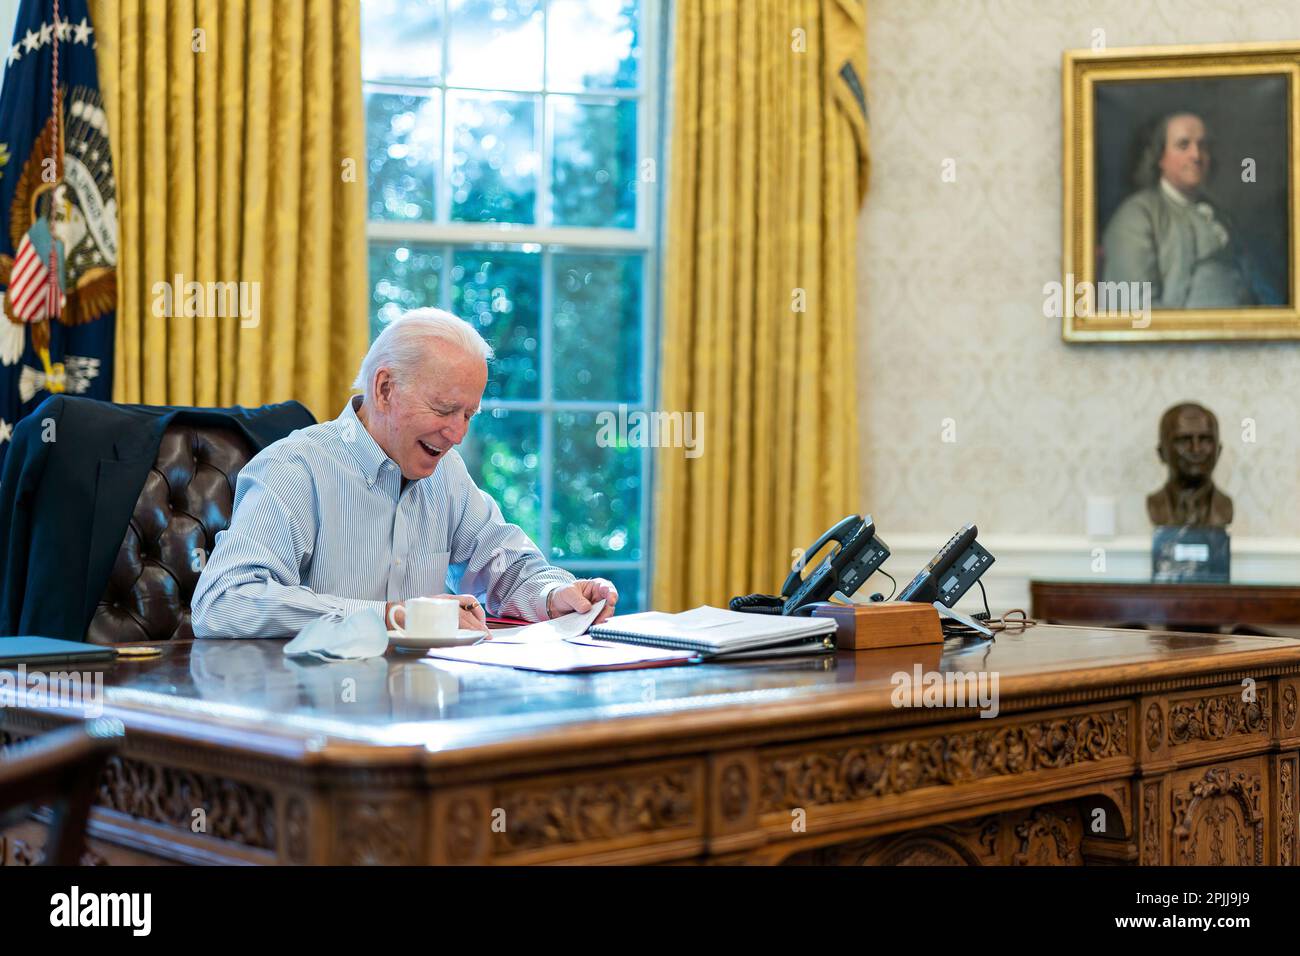 P20210123AS-0258: President Joe Biden talks on the phone with British Prime Minister Boris Johnson Saturday, Jan. 23, 2021, in the Oval Office of the White House. (Official White House Photo by Adam Schultz) Stock Photo